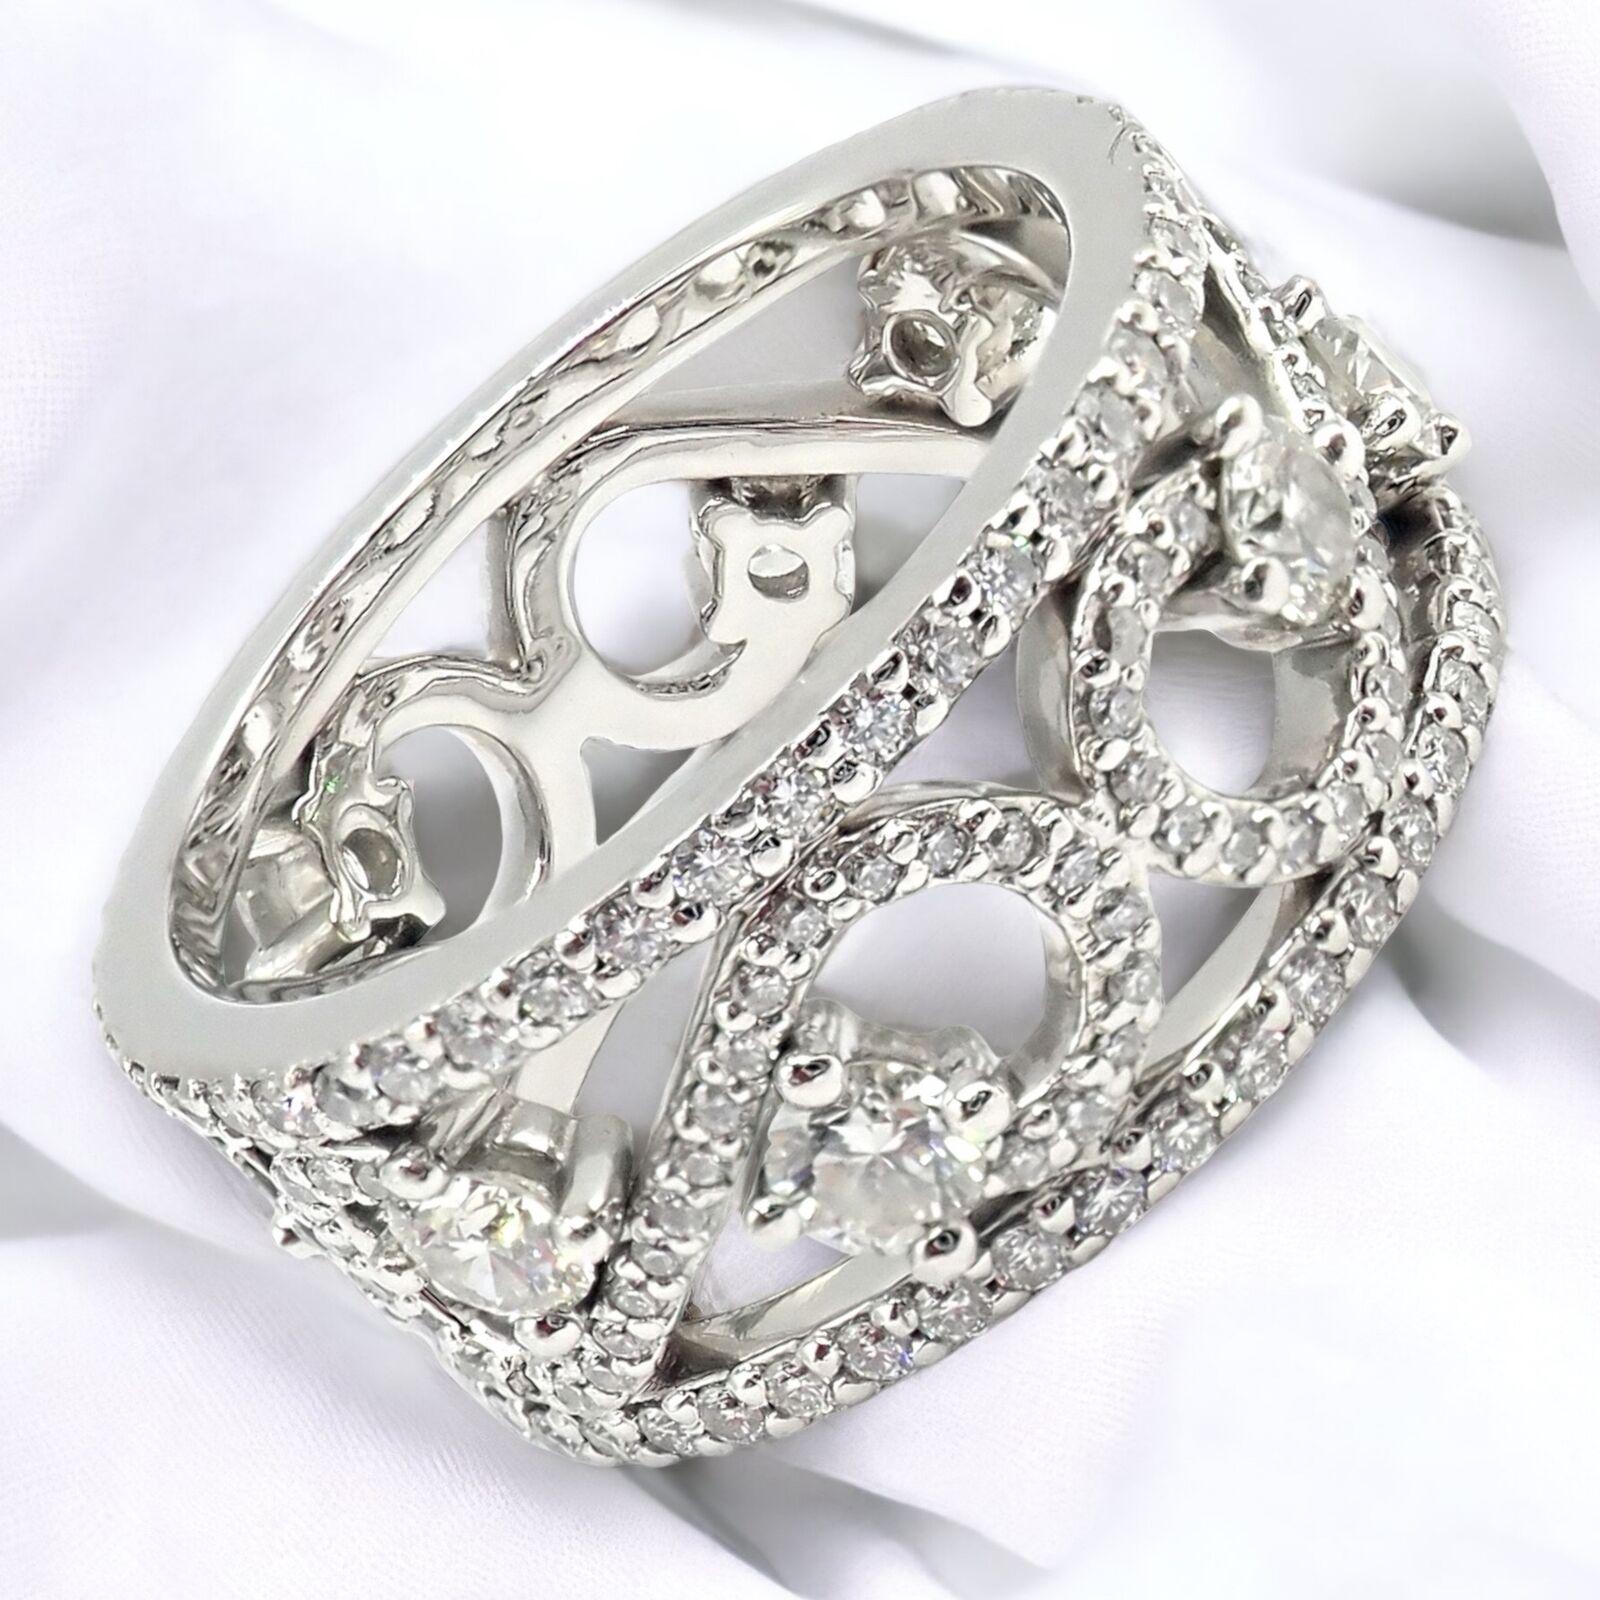 Tiffany & Co Diamond Enchant Scroll Wide Platinum Band Ring In Excellent Condition For Sale In Holland, PA